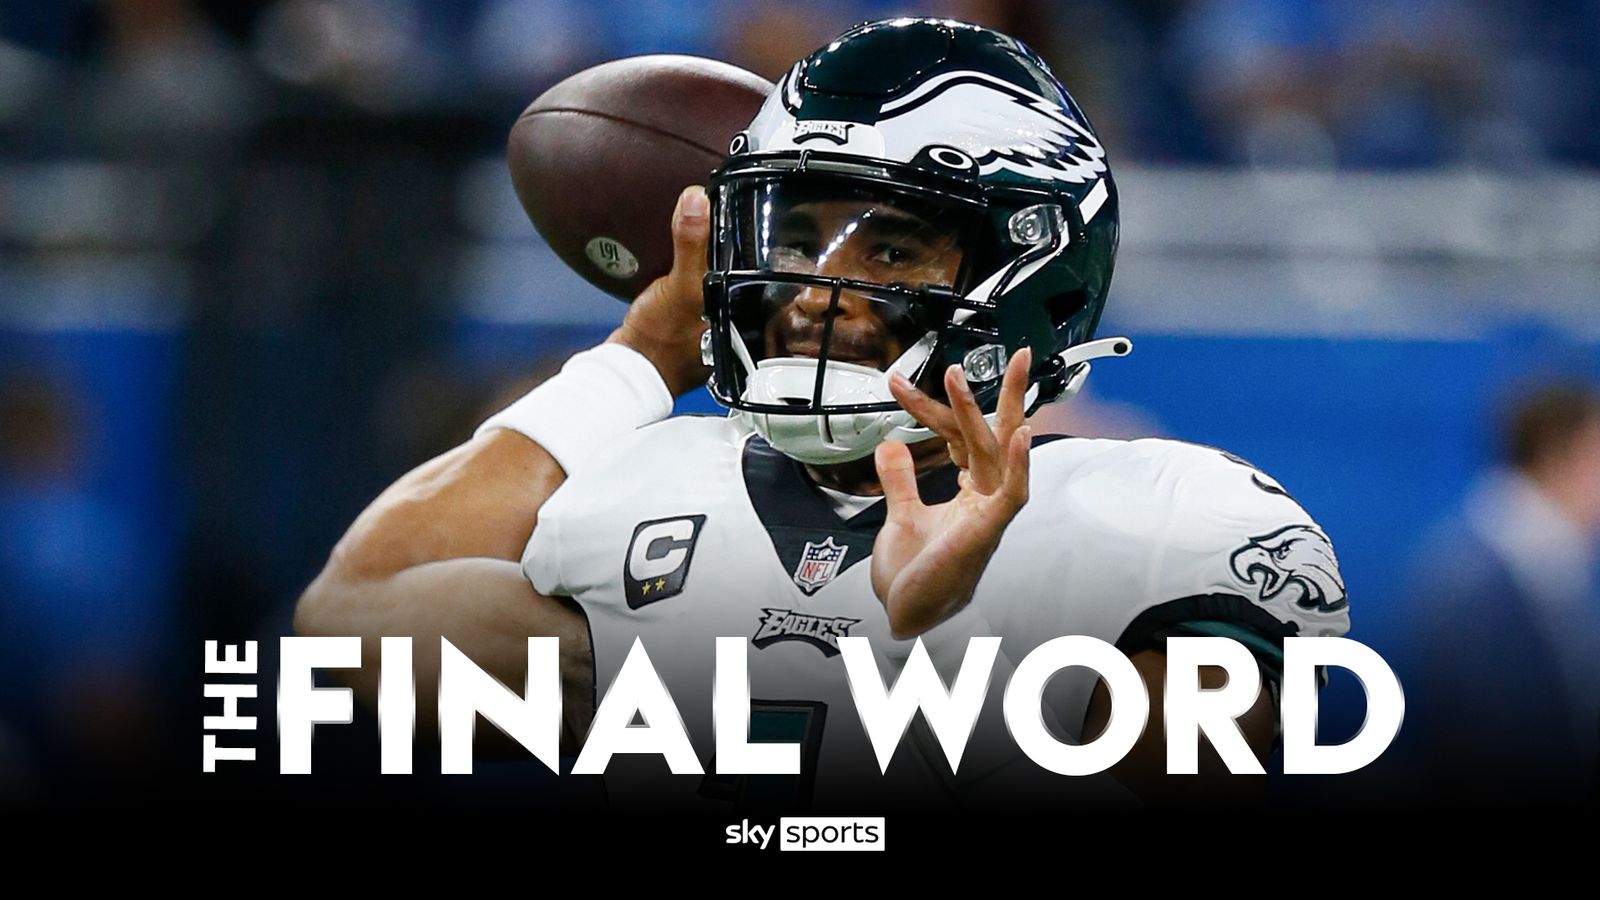 NFL: Philadelphia Eagles impress, Saquon Barkley back to his best and Justin Jefferson’s in for monster year in Minnesota